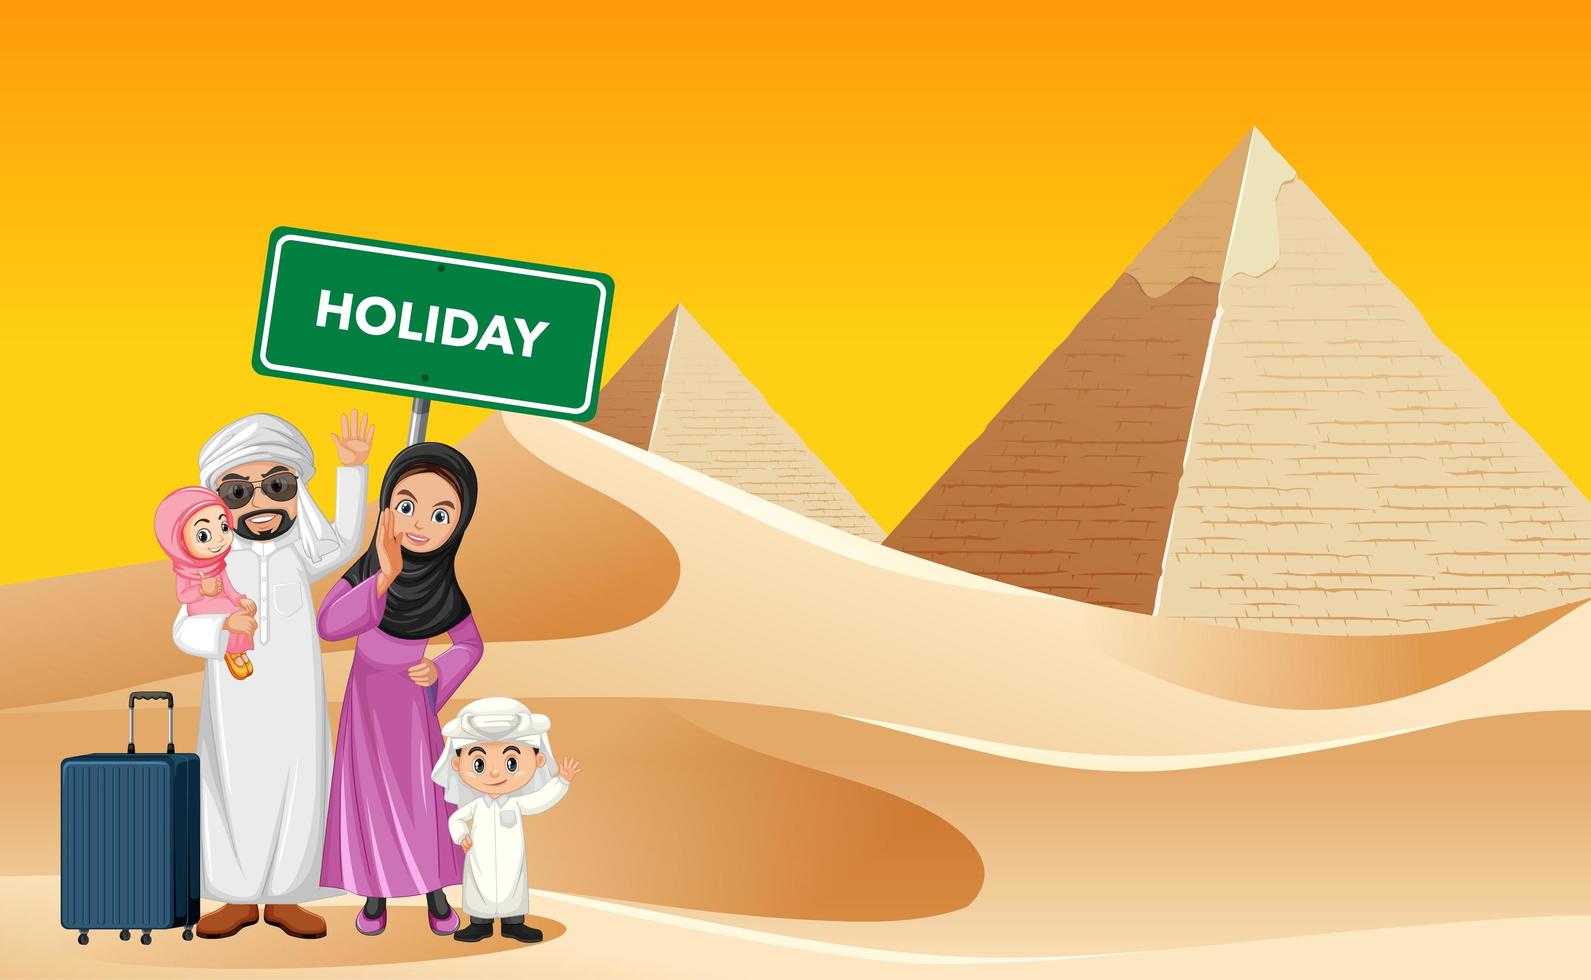 Arabian family on holiday in a pyramids setting vector